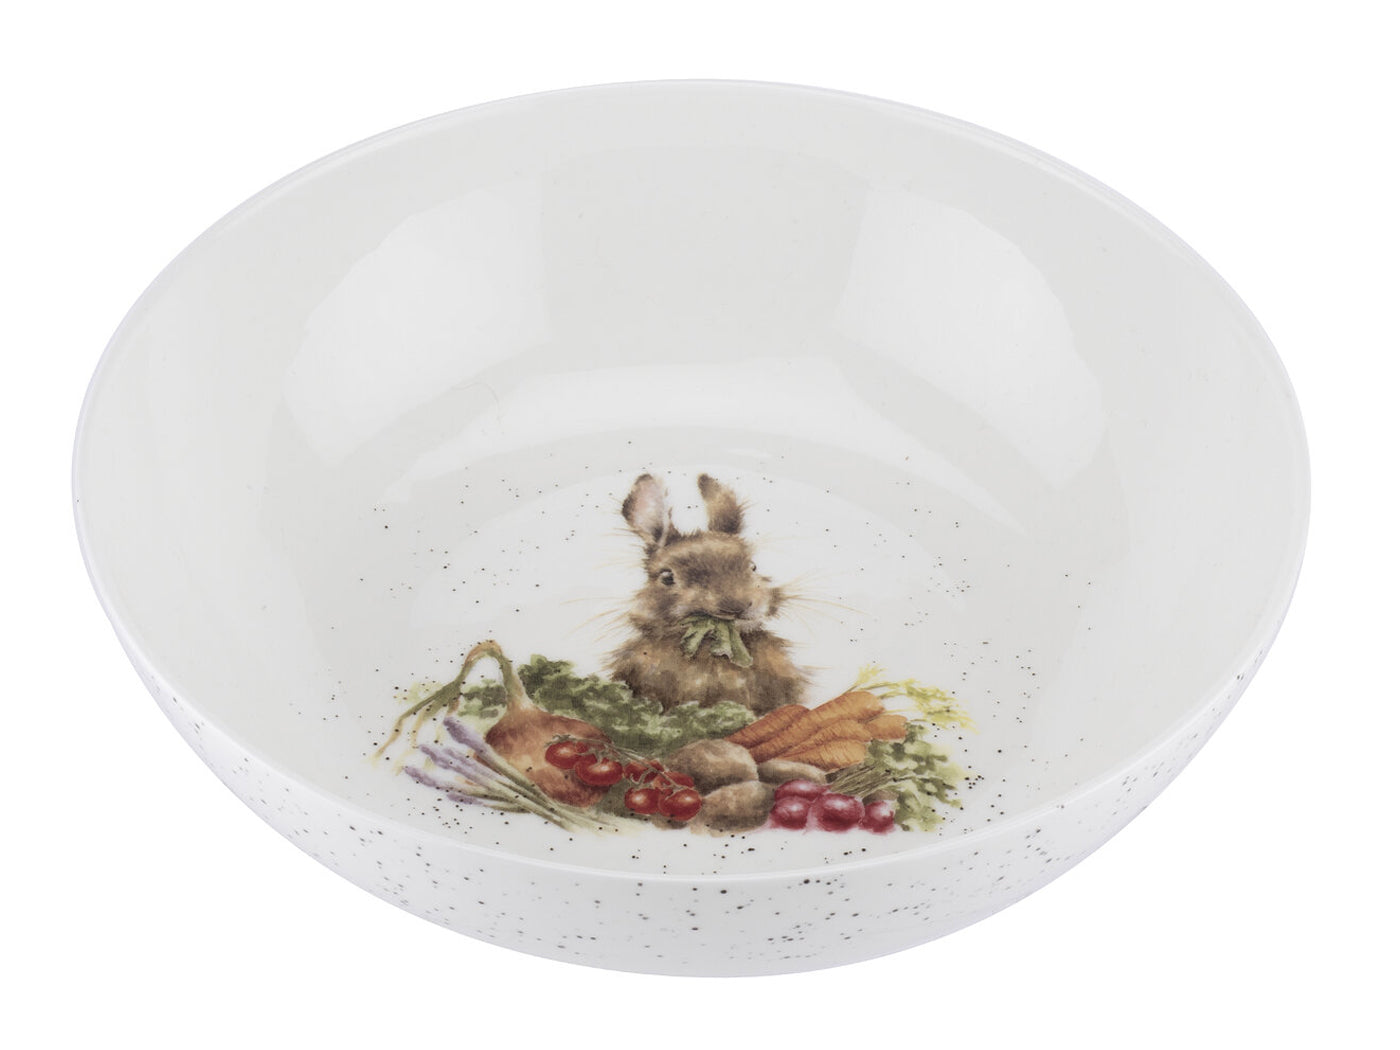 Royal Worcester Wrendale 10" Salad Bowl - Grow Your Own / Rabbit